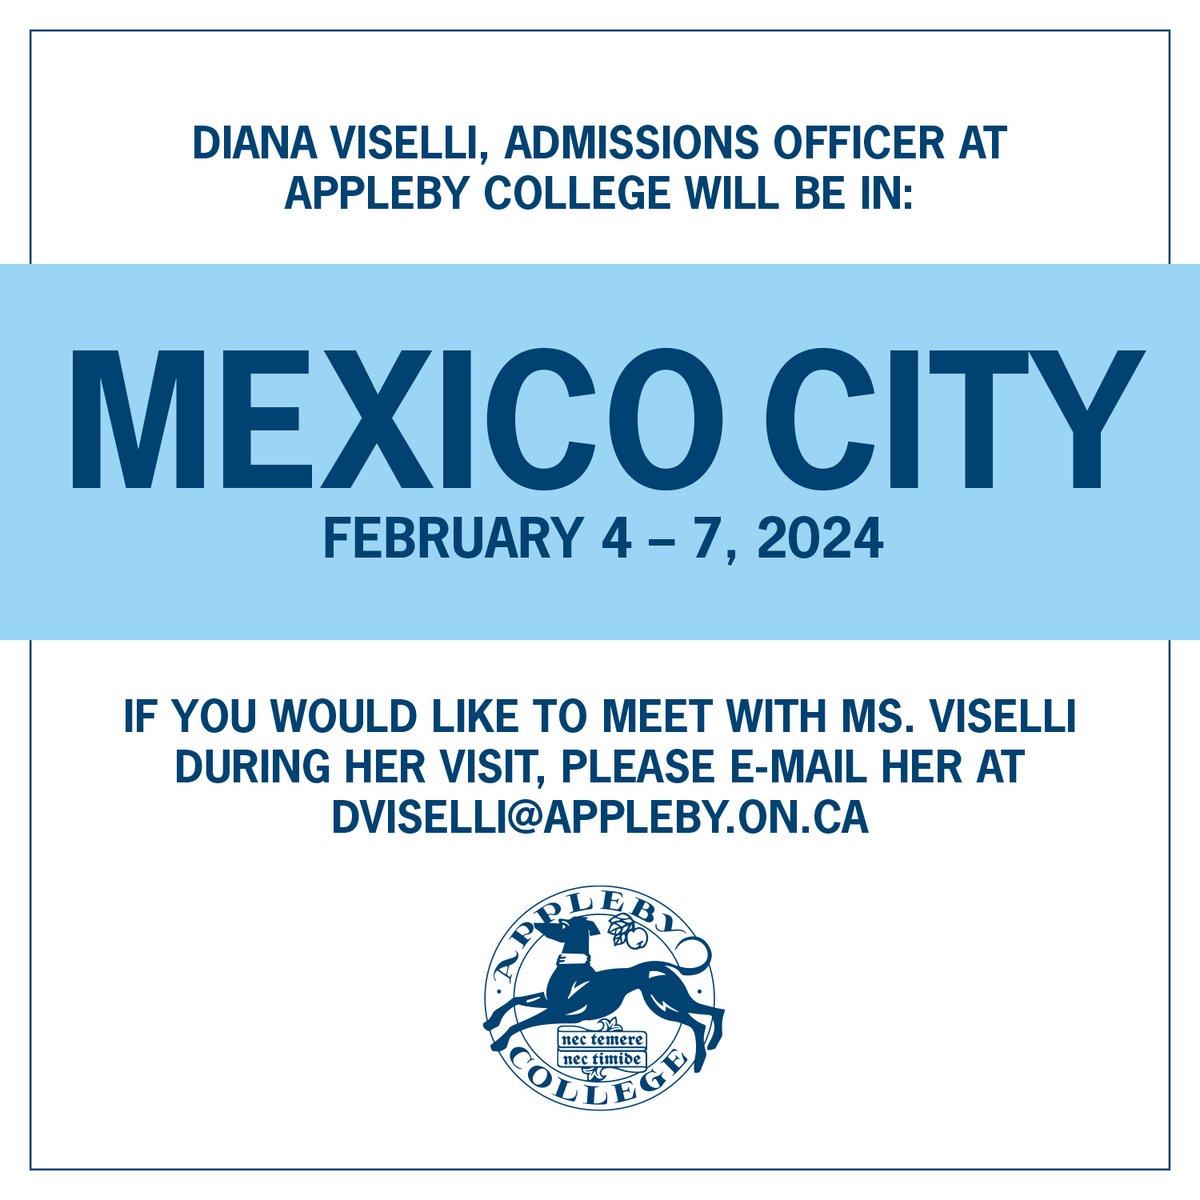 If you would like to meet with Diana Viselli, Admissions Officer, during her visit to Mexico City from February 4-7, please send her an e-mail at dviselli@appleby.on.ca. #ApplebyCollege #independentschool #admissions